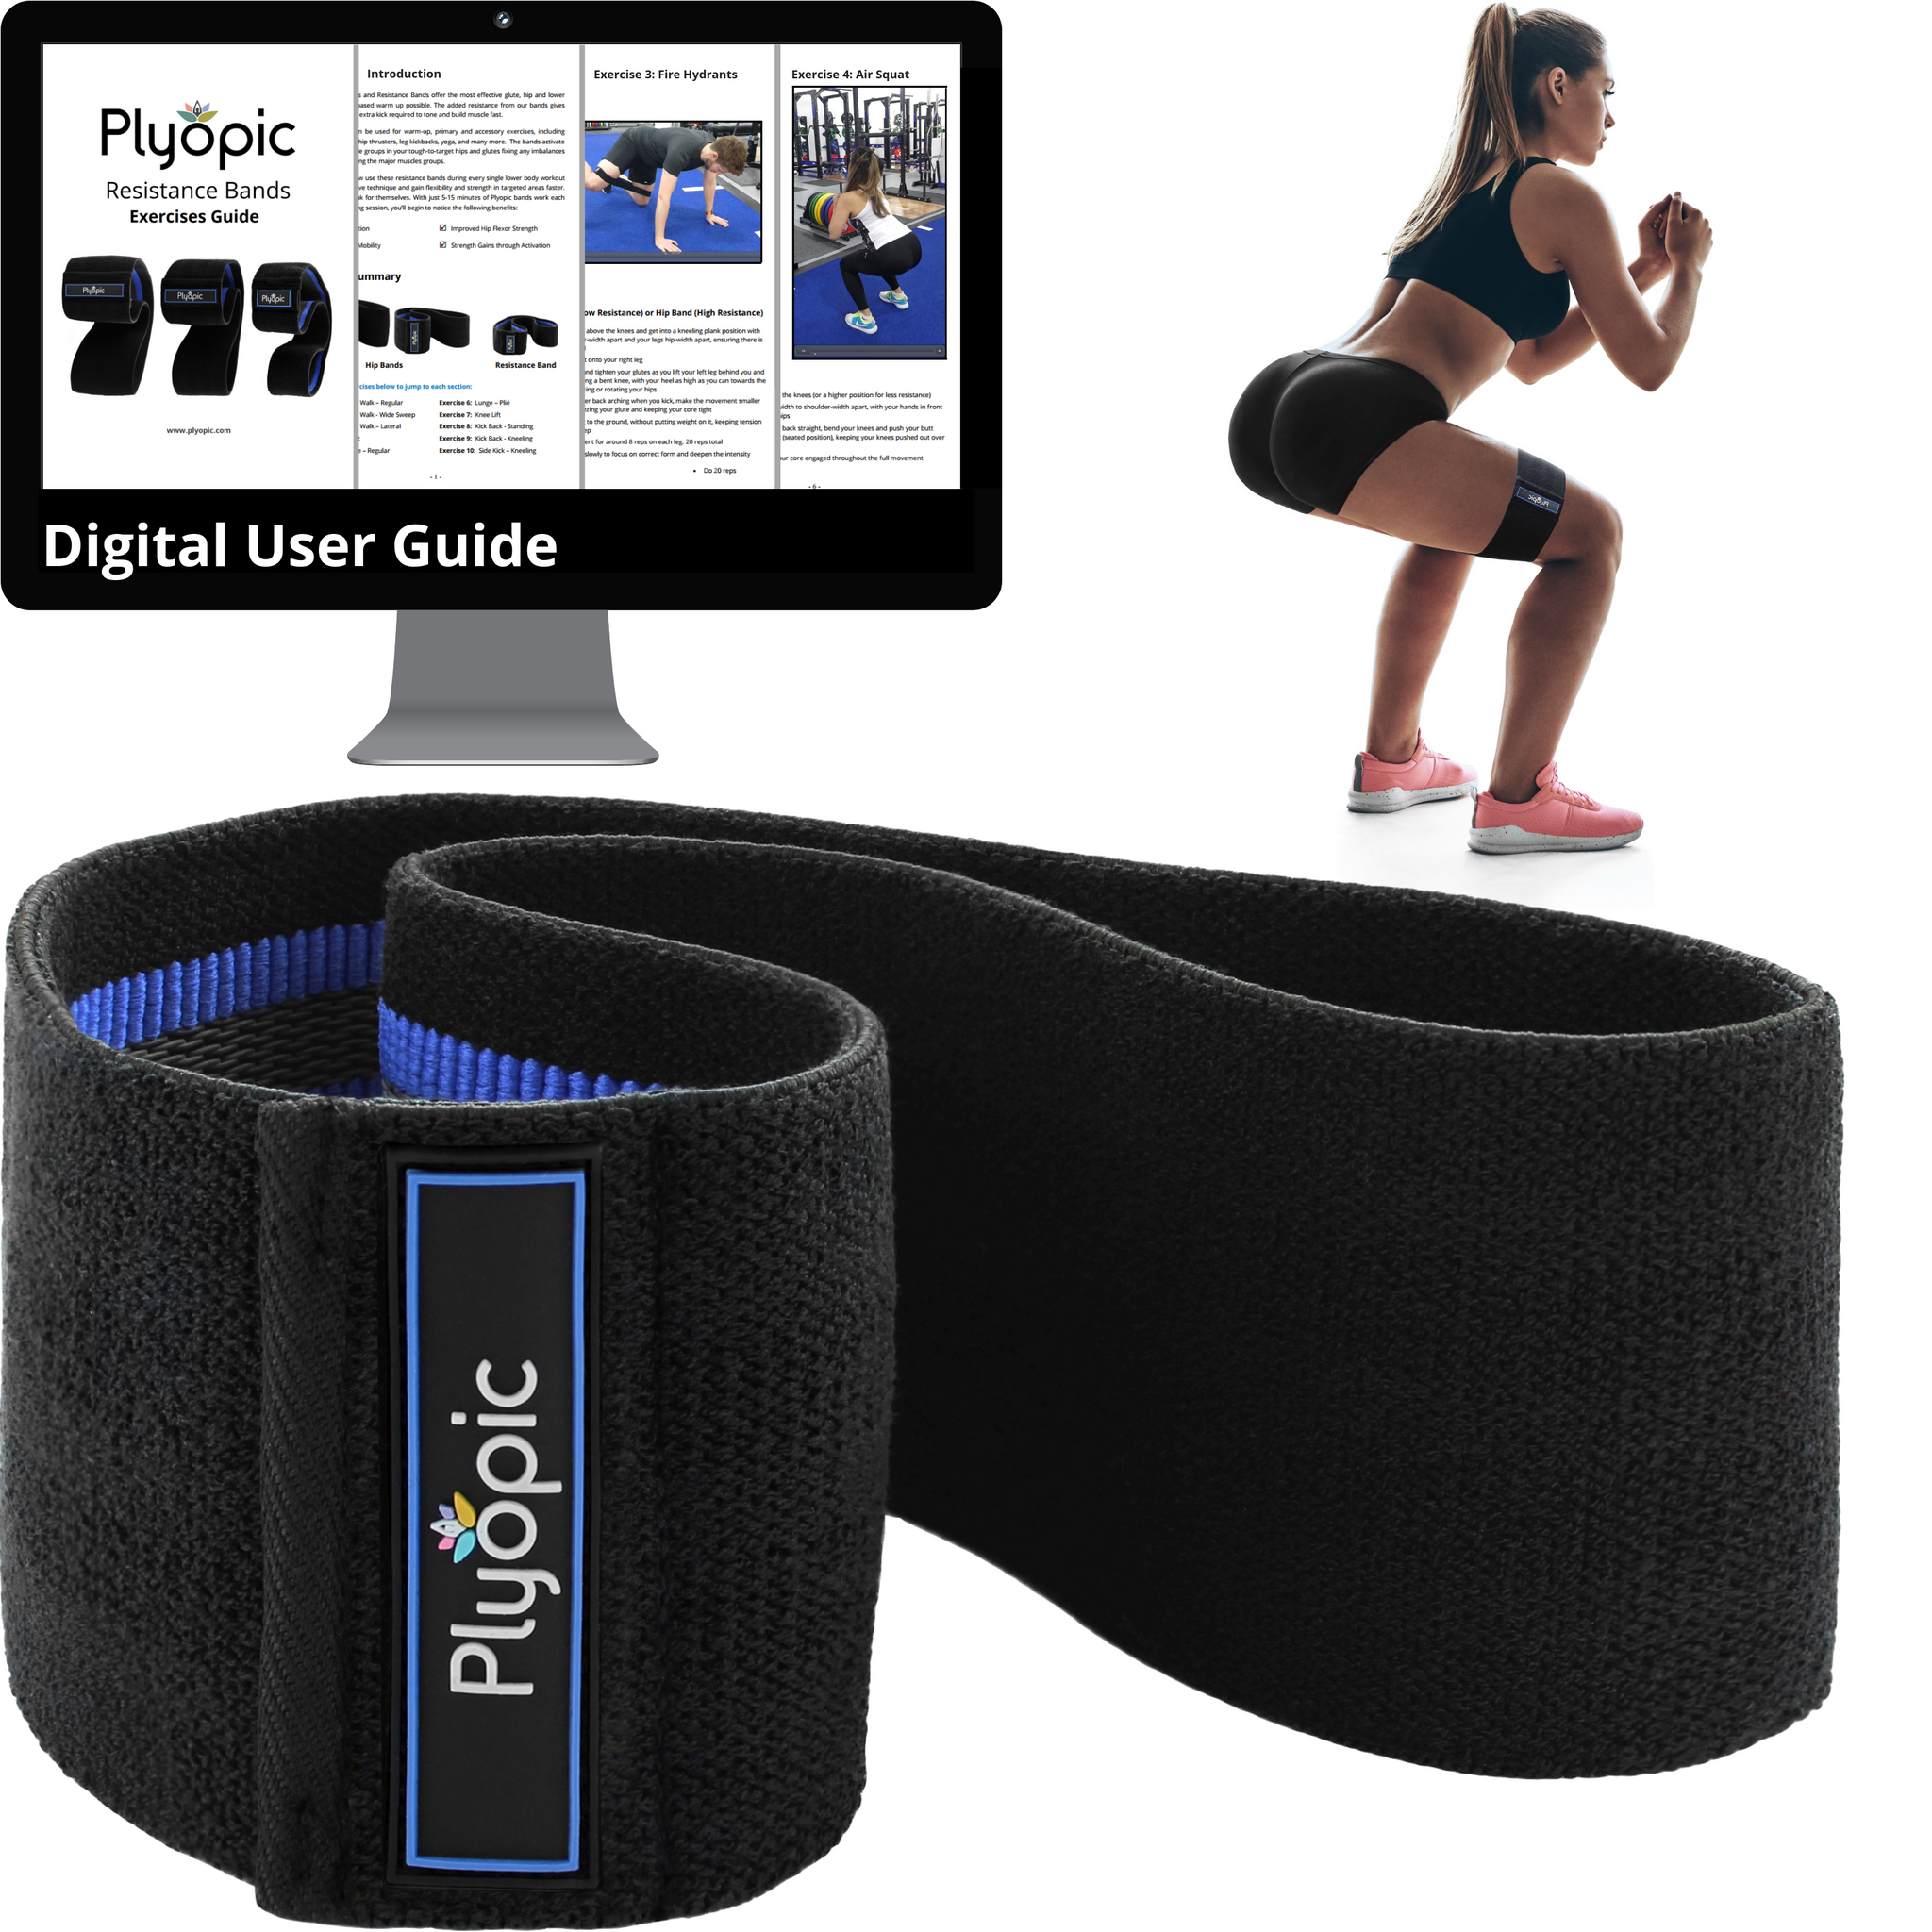 Plyopic-Women's Hip Band (For Upper Legs)-Hip Resistance Band Digital User Guide and Resistance Band Worn on Woman Squatting